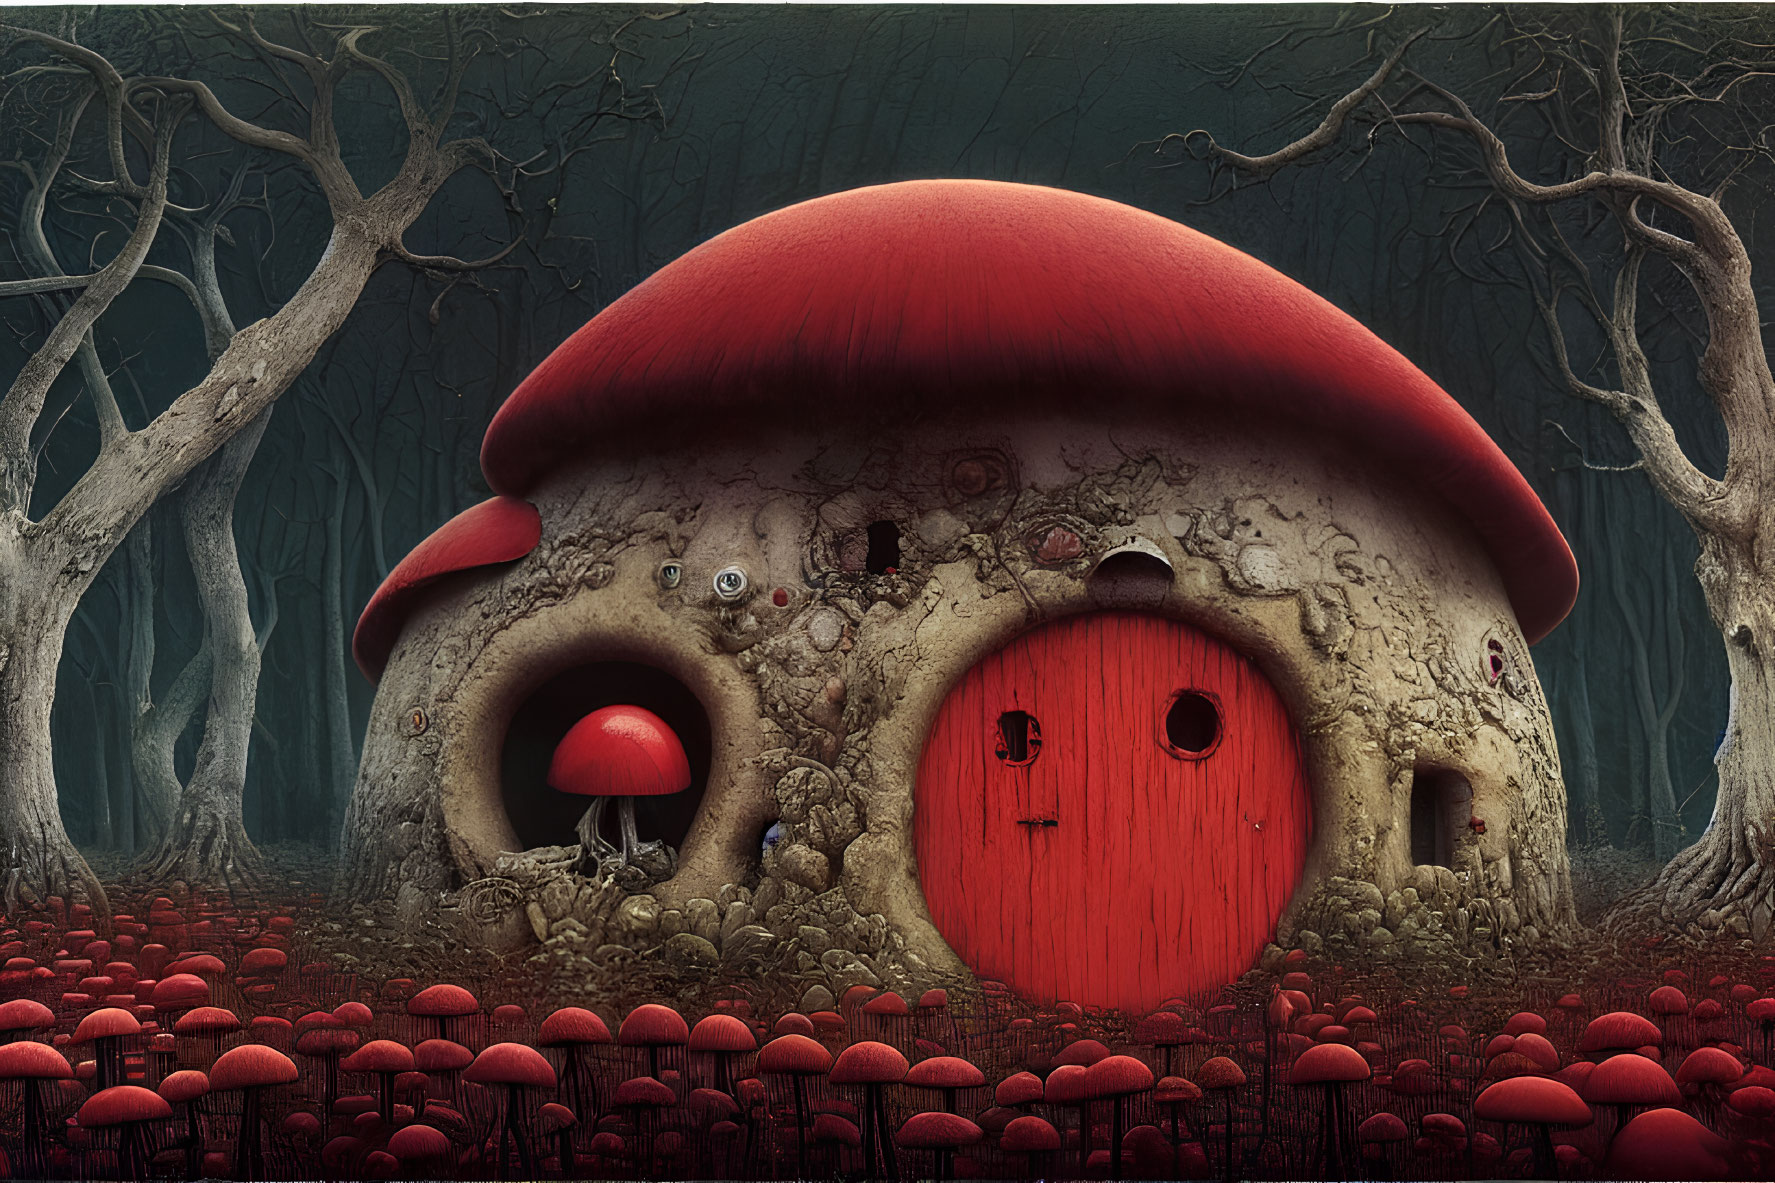 Whimsical illustration of a red-capped mushroom house in eerie forest